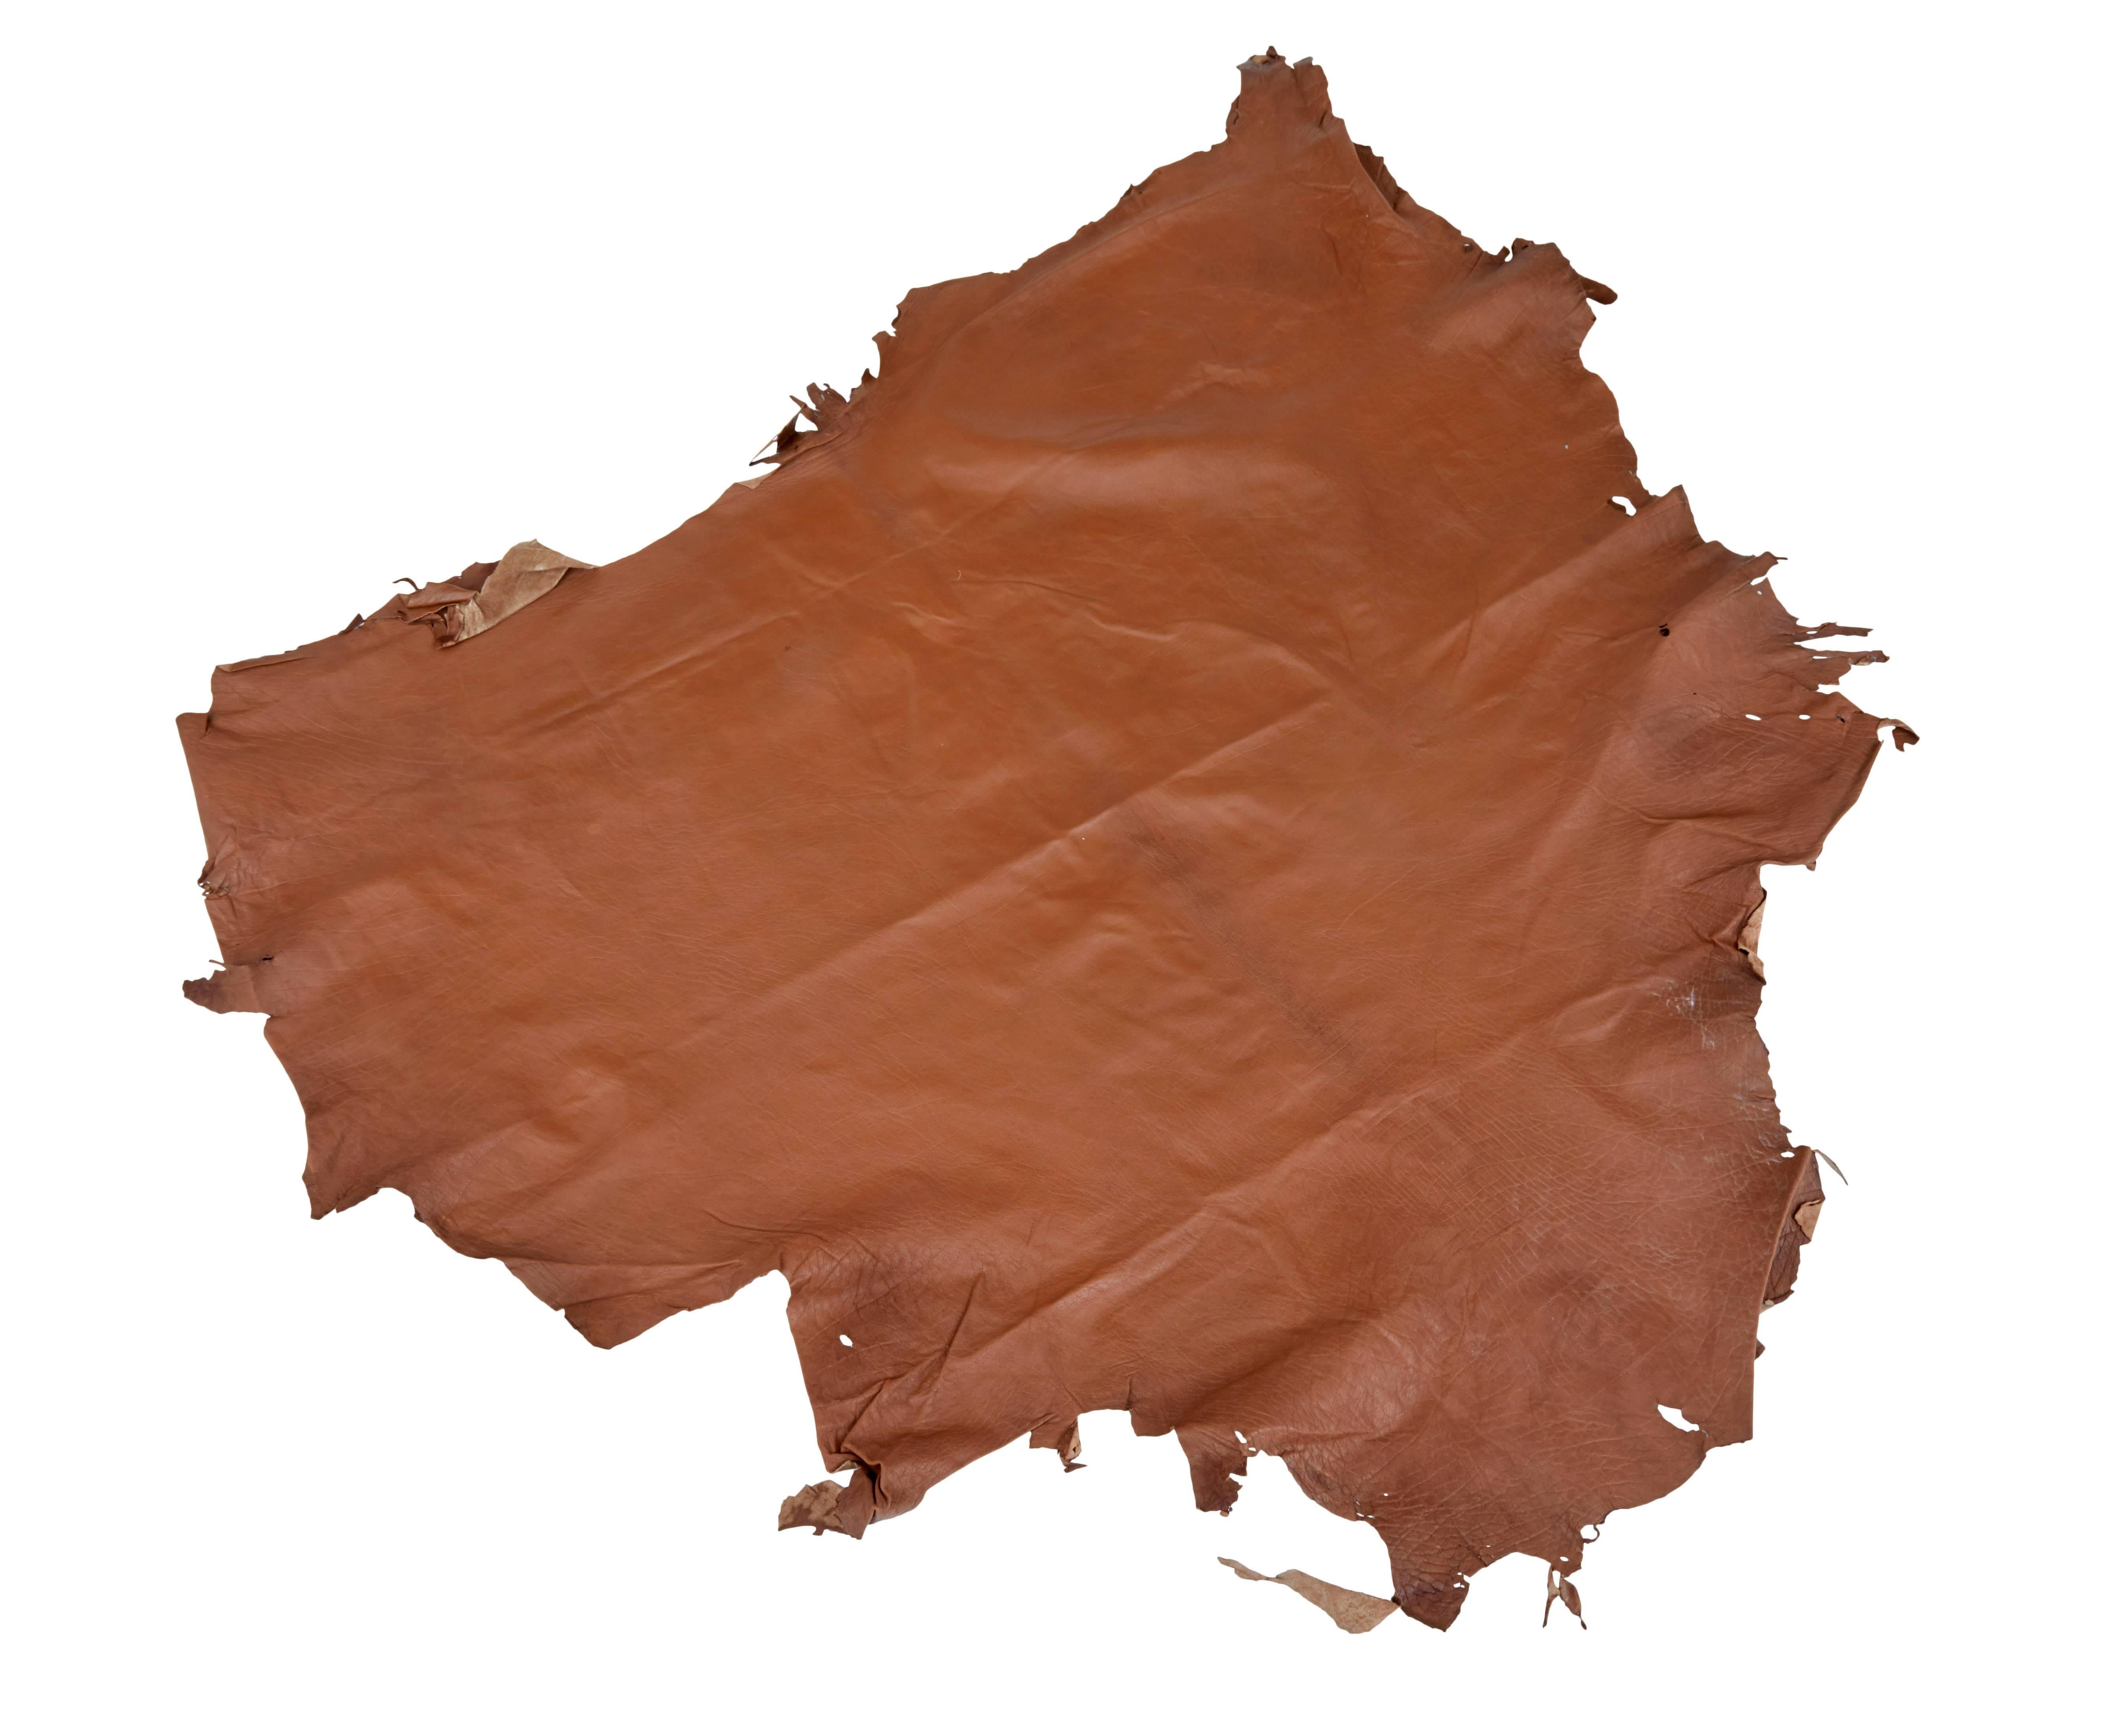 Collection of ten tan cow hide skins for upholstery

These are all 1 year old skins. 

Good quality tan leather hides ready for use in upholstery.

Largest 52